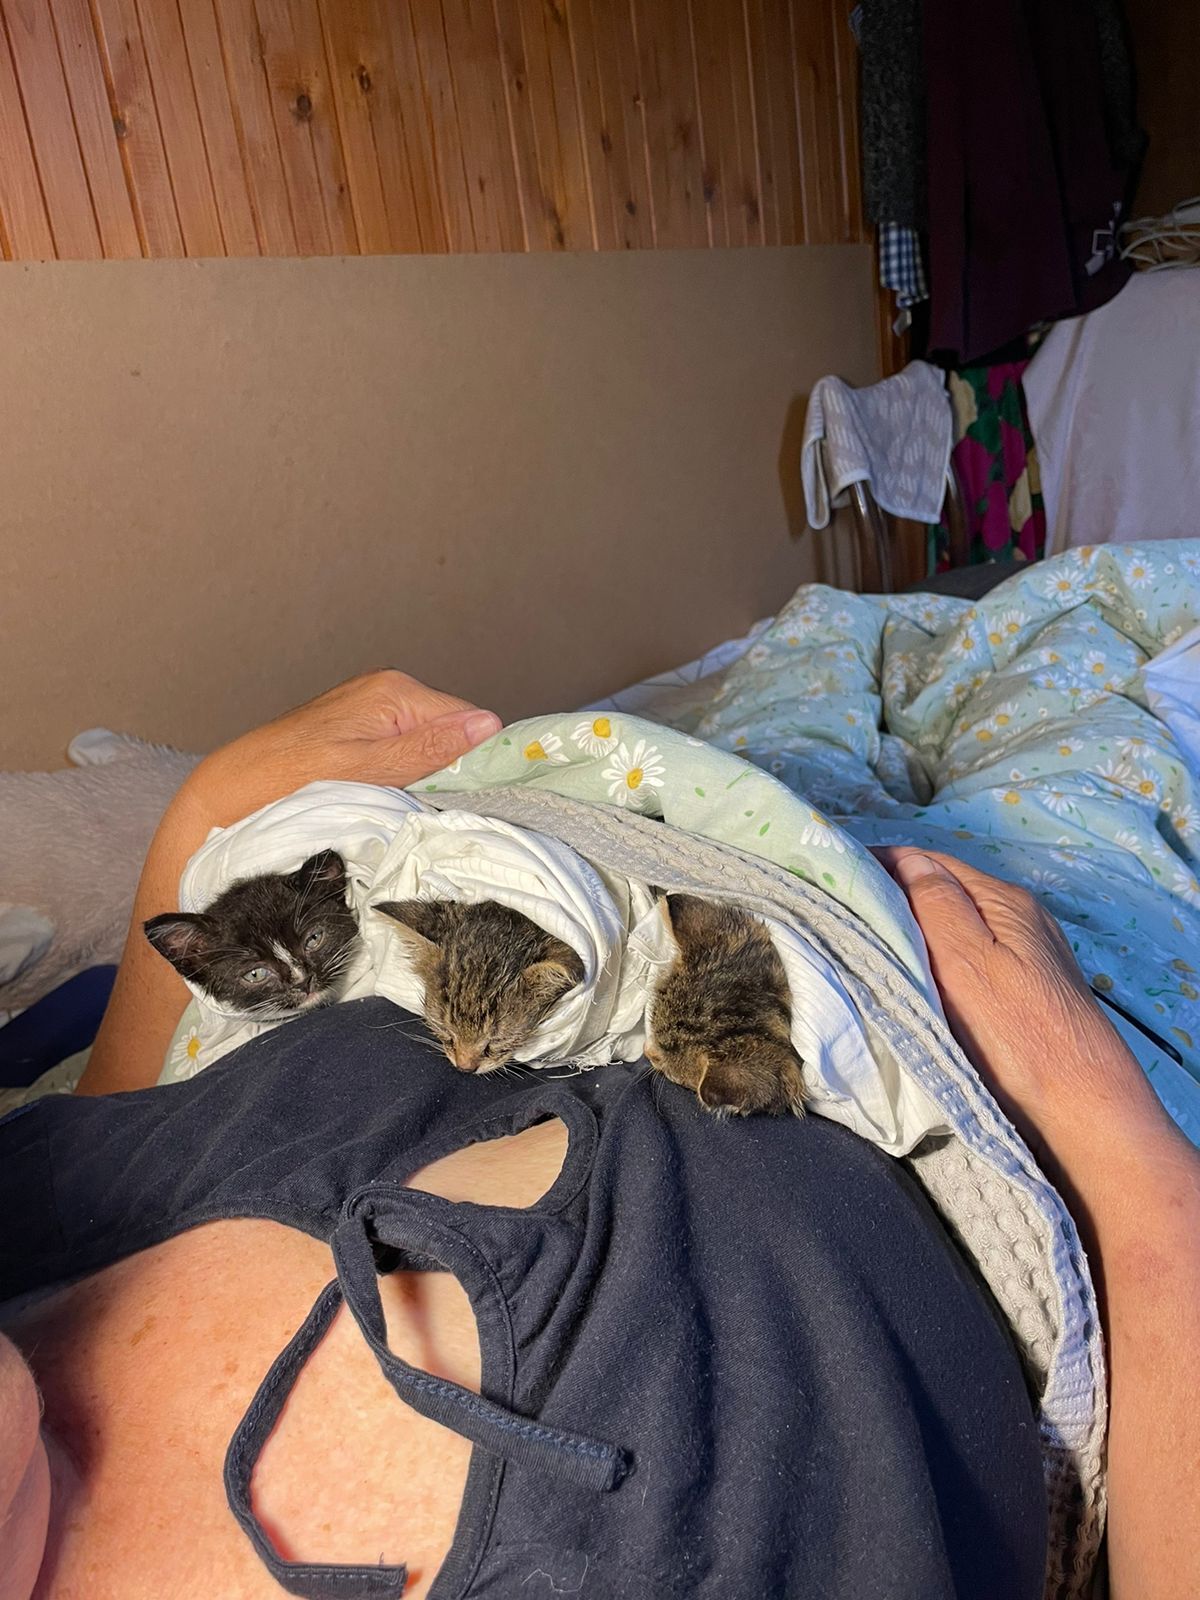 Three tiny kittens were found in a bag in a field yesterday. I really need help - Moscow region, No rating, cat, Helping animals, Kittens, Animal Rescue, The strength of the Peekaboo, Homeless animals, Overexposure, In good hands, Video, Longpost